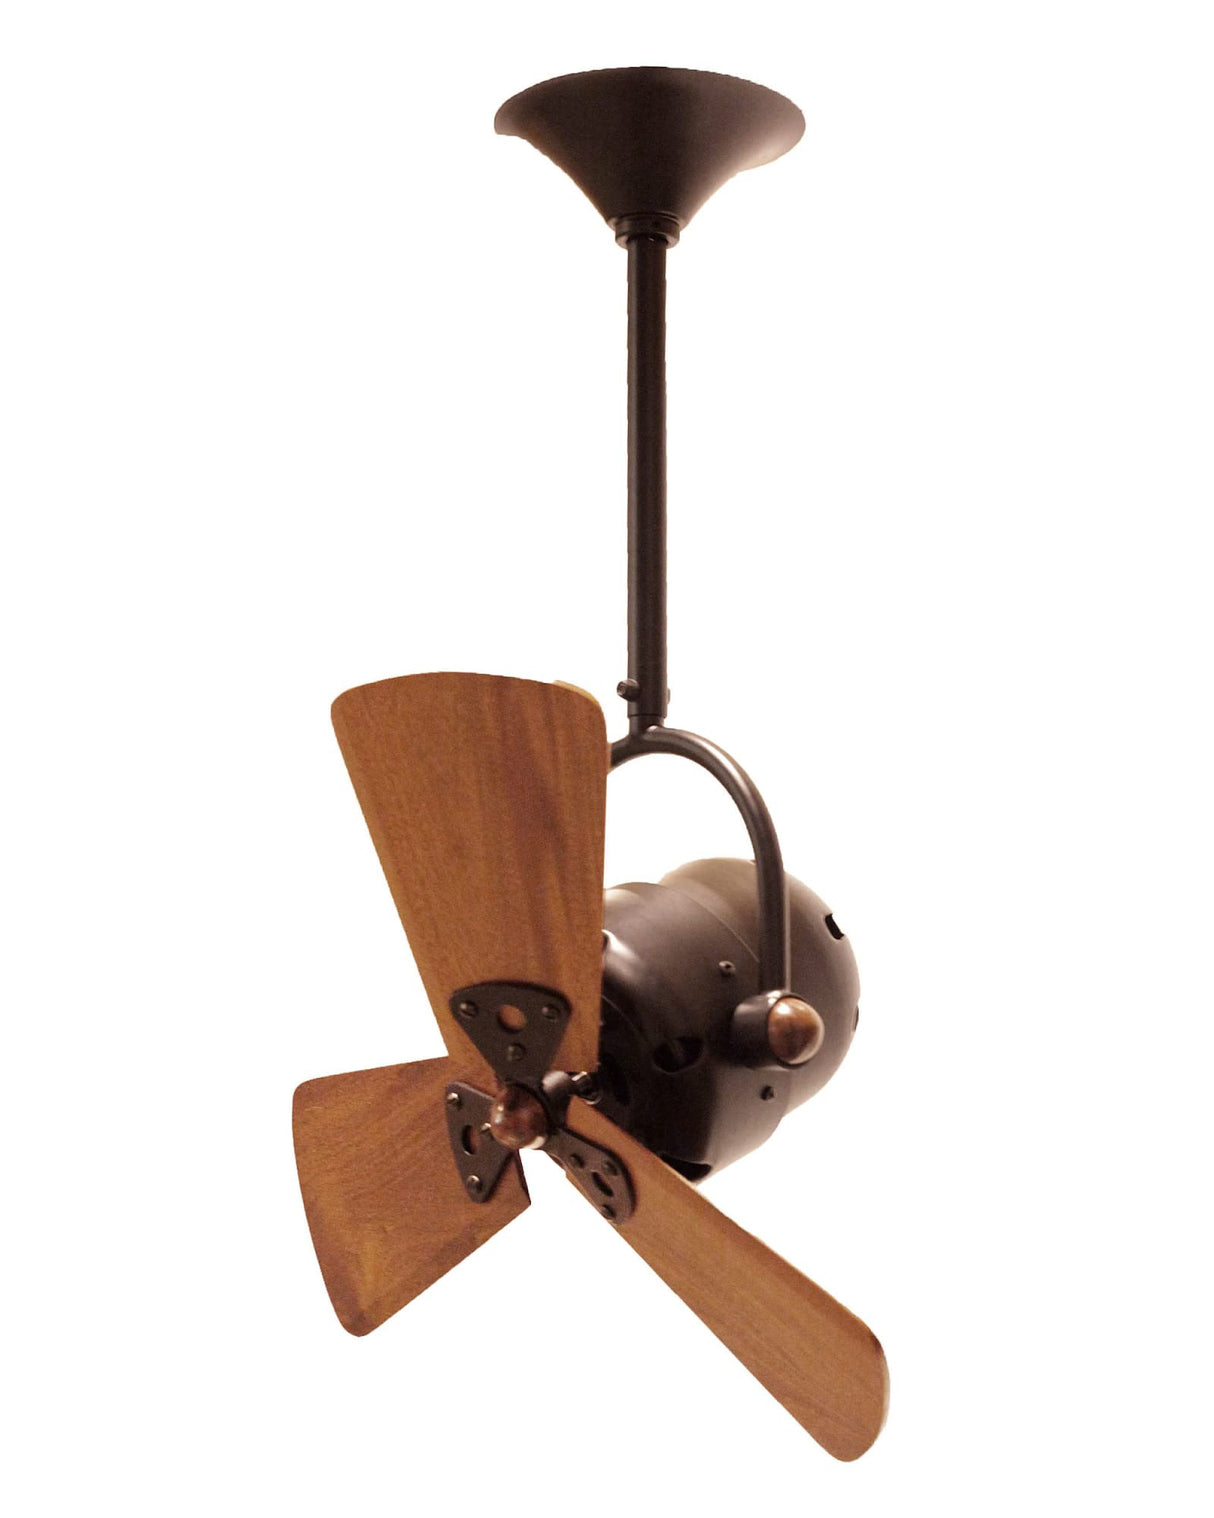 Matthews Fan BD-RED-WD Bianca Direcional ceiling fan in Rubi (Red) finish with solid sustainable mahogany wood blades.